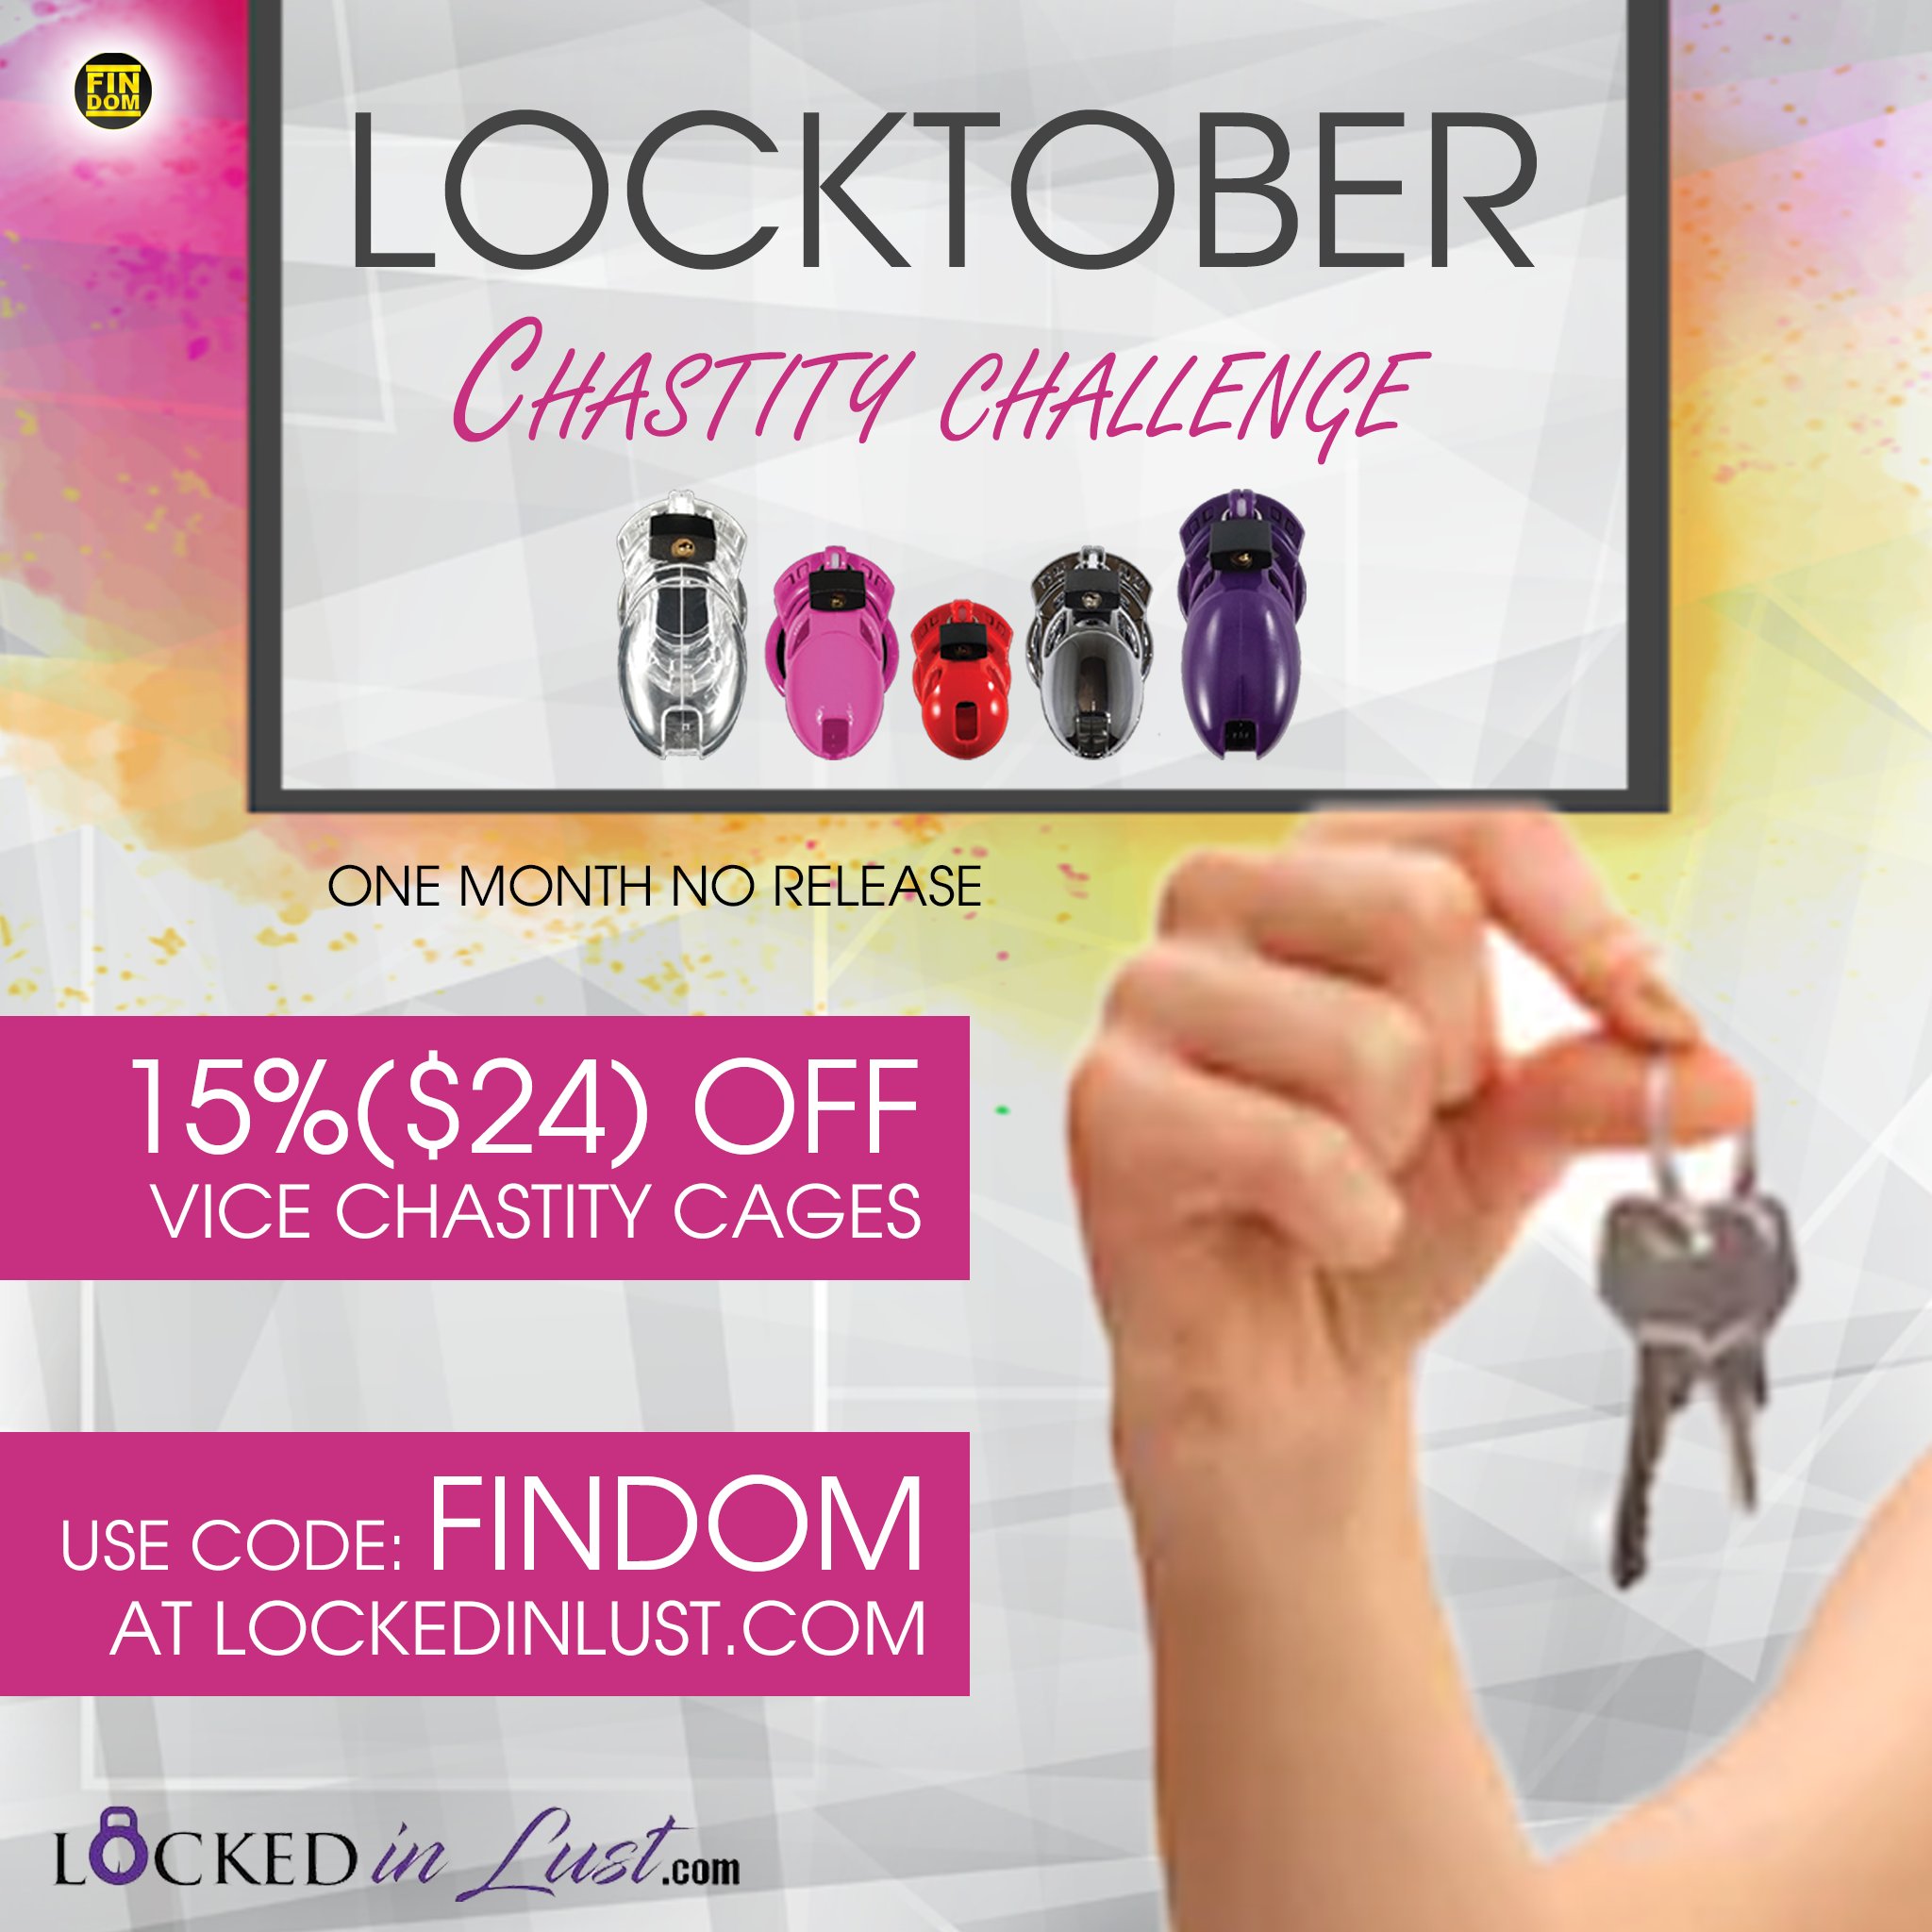 “Are you ready for Locktober? 